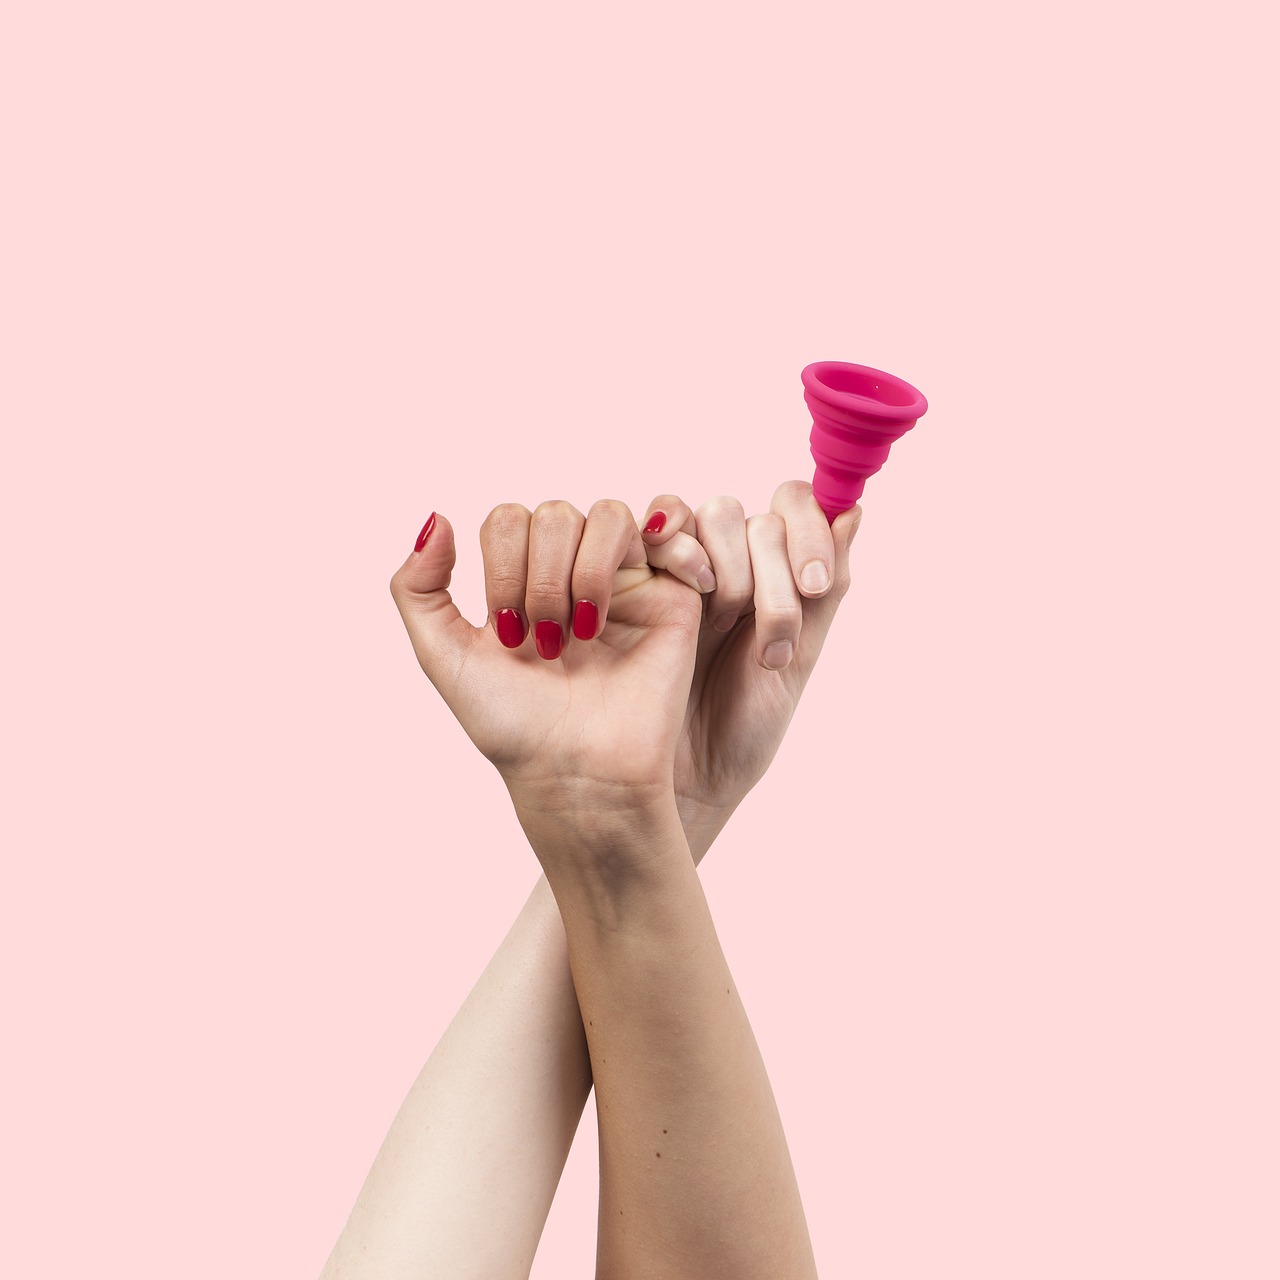 My reusable menstrual care regime - how to choose a menstrual cup and the products I recommend